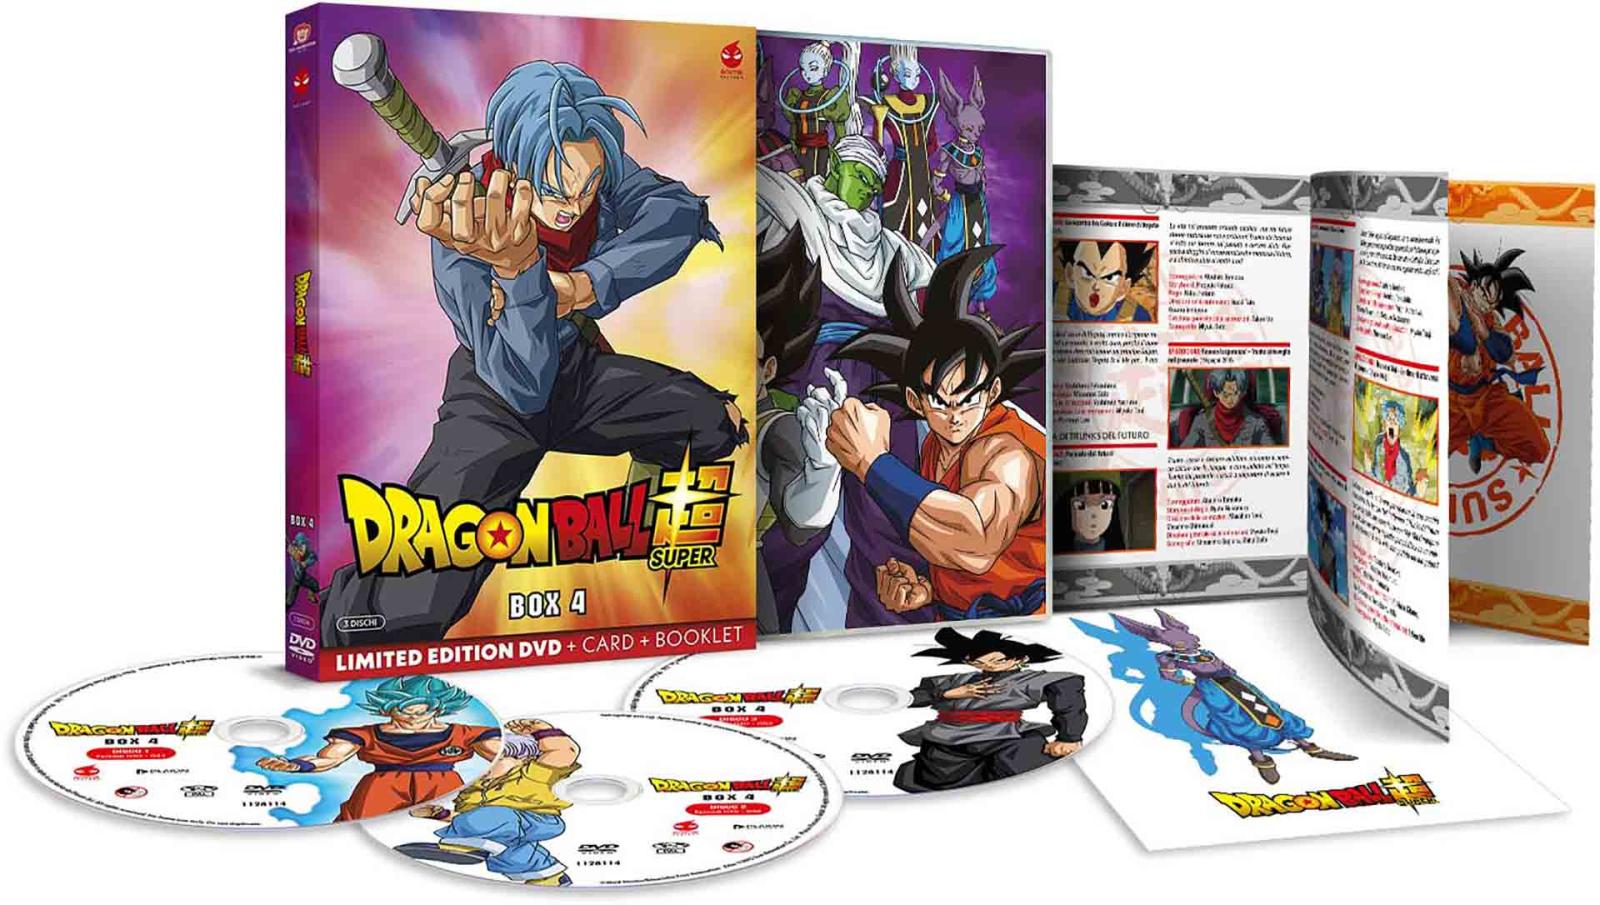 Dragon Ball Super - Volume 4 - Limited Edition 3 DVD + Card + Booklet (DVD) Image 2